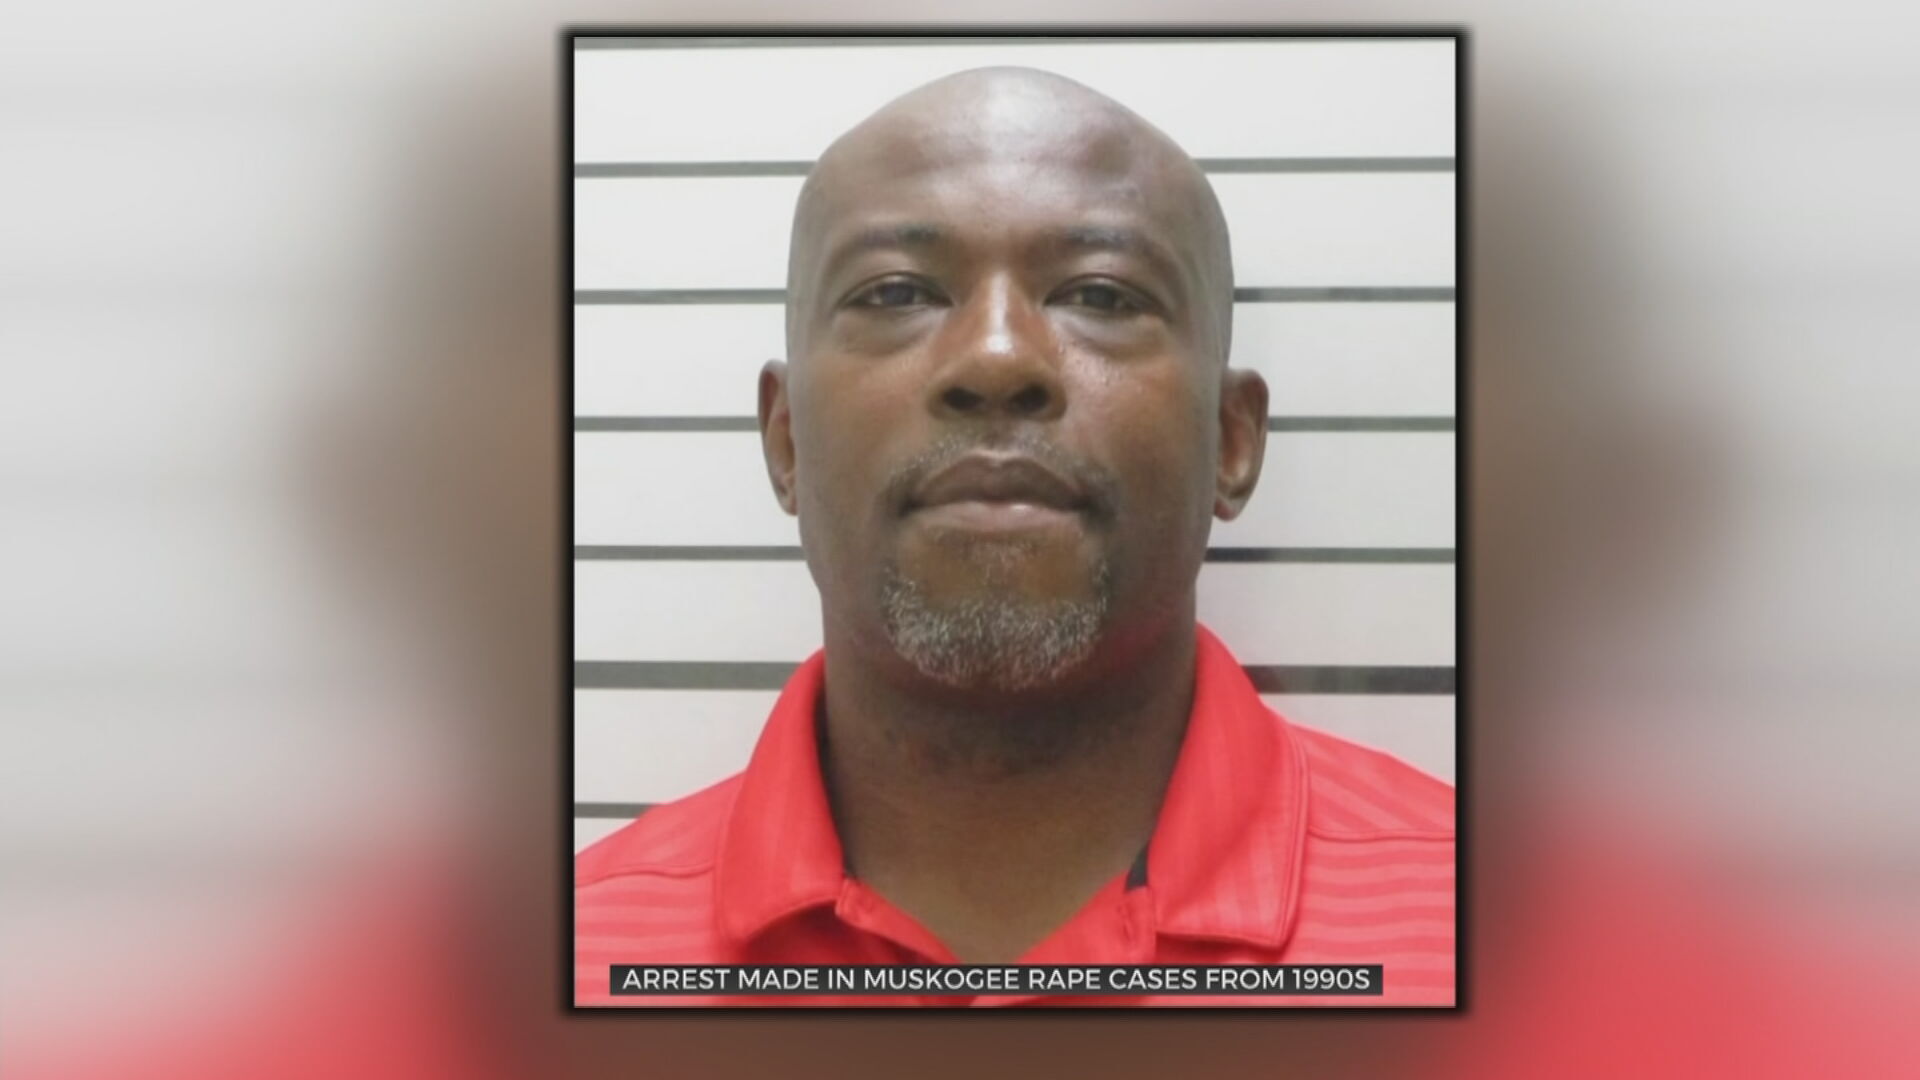 Man Charged With 5 Counts Of Rape In 1990s Muskogee Cases